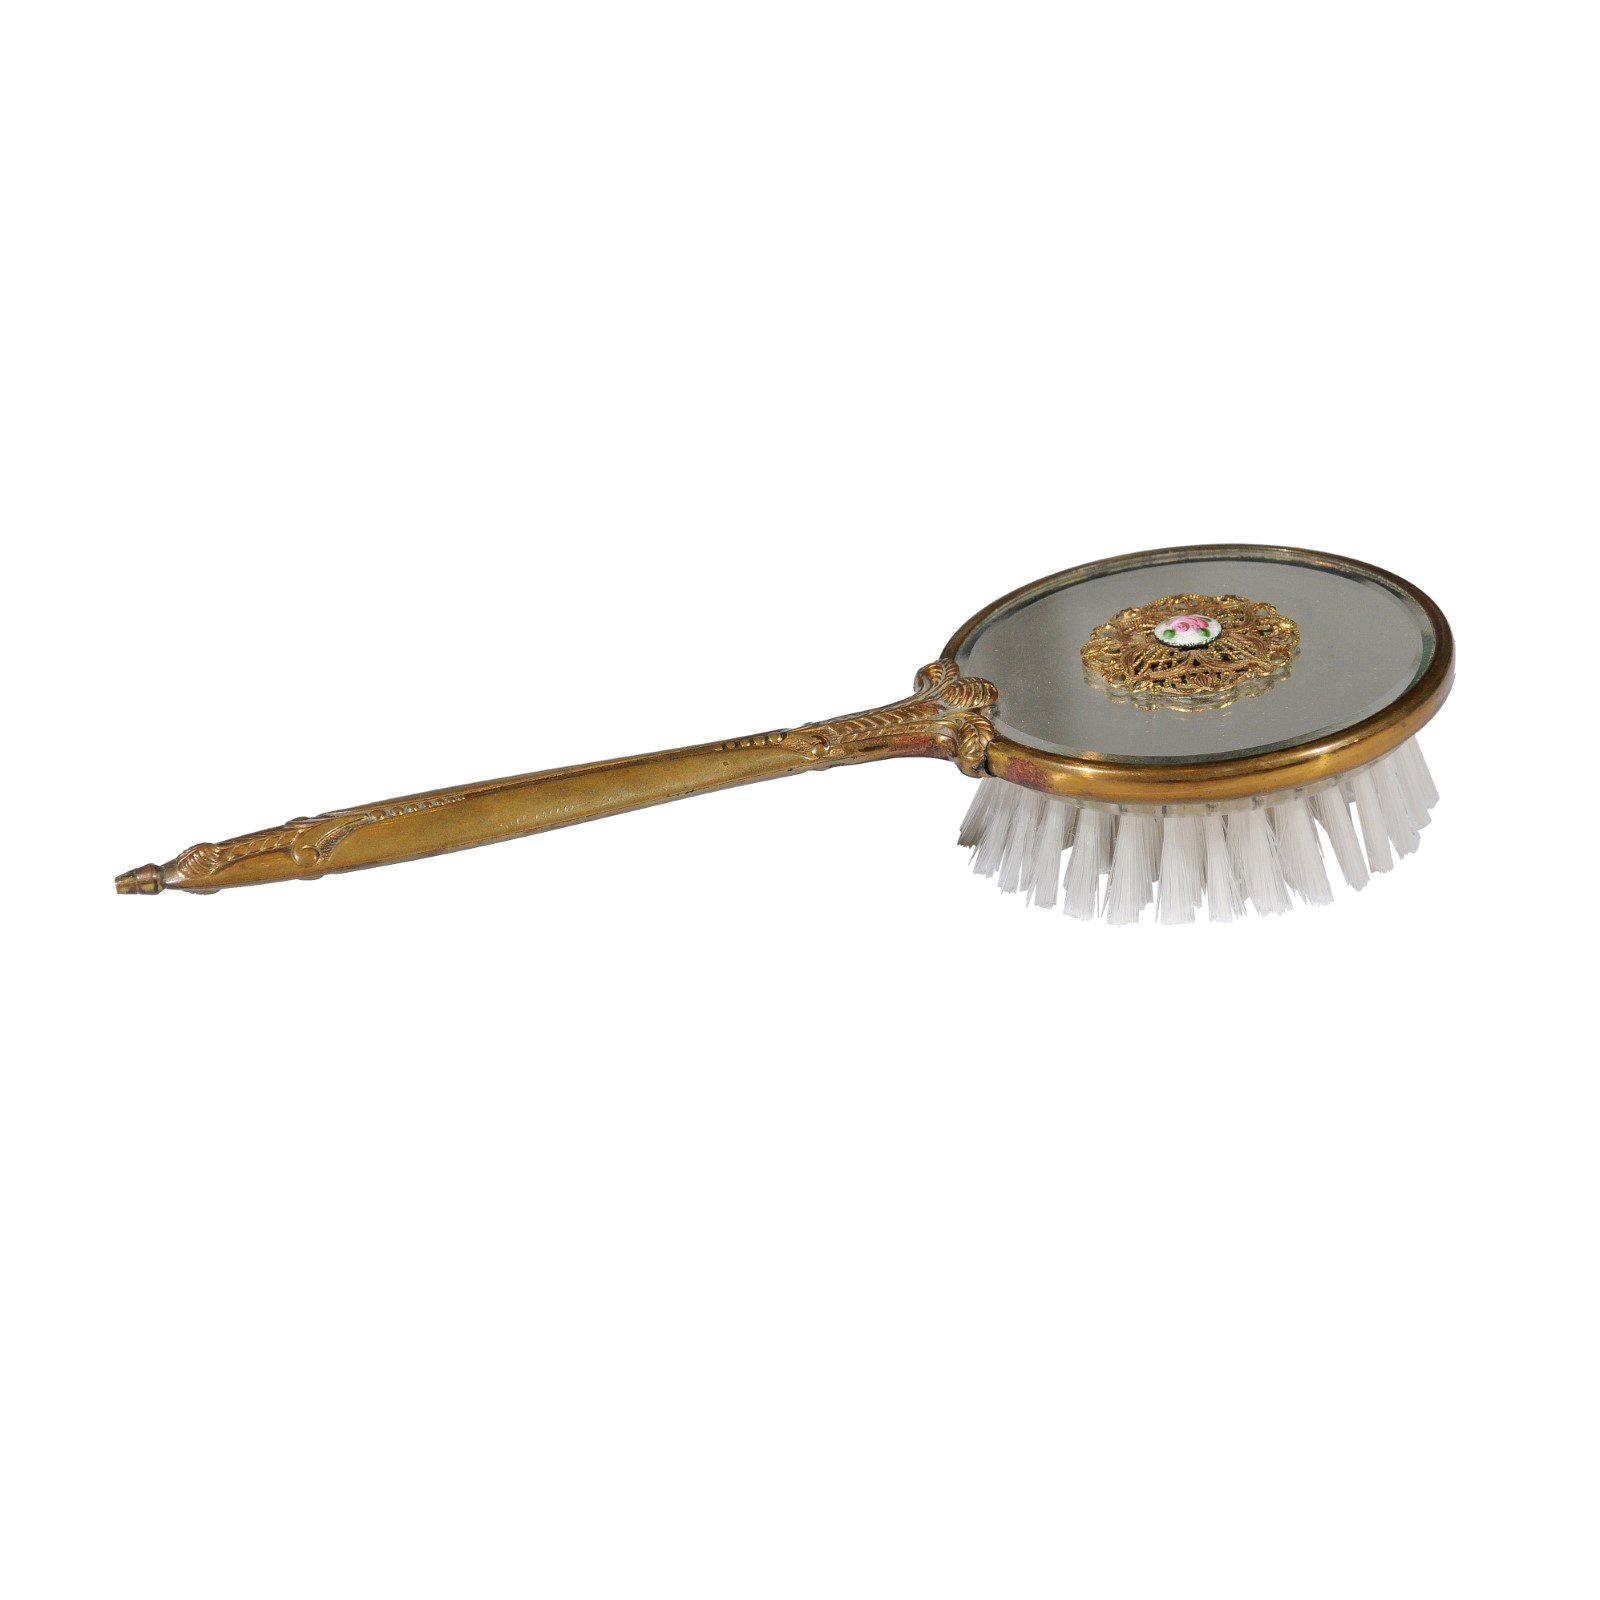 English Mirrored Hair Brush with Brass Finish, Filigree Décor and Medallion For Sale